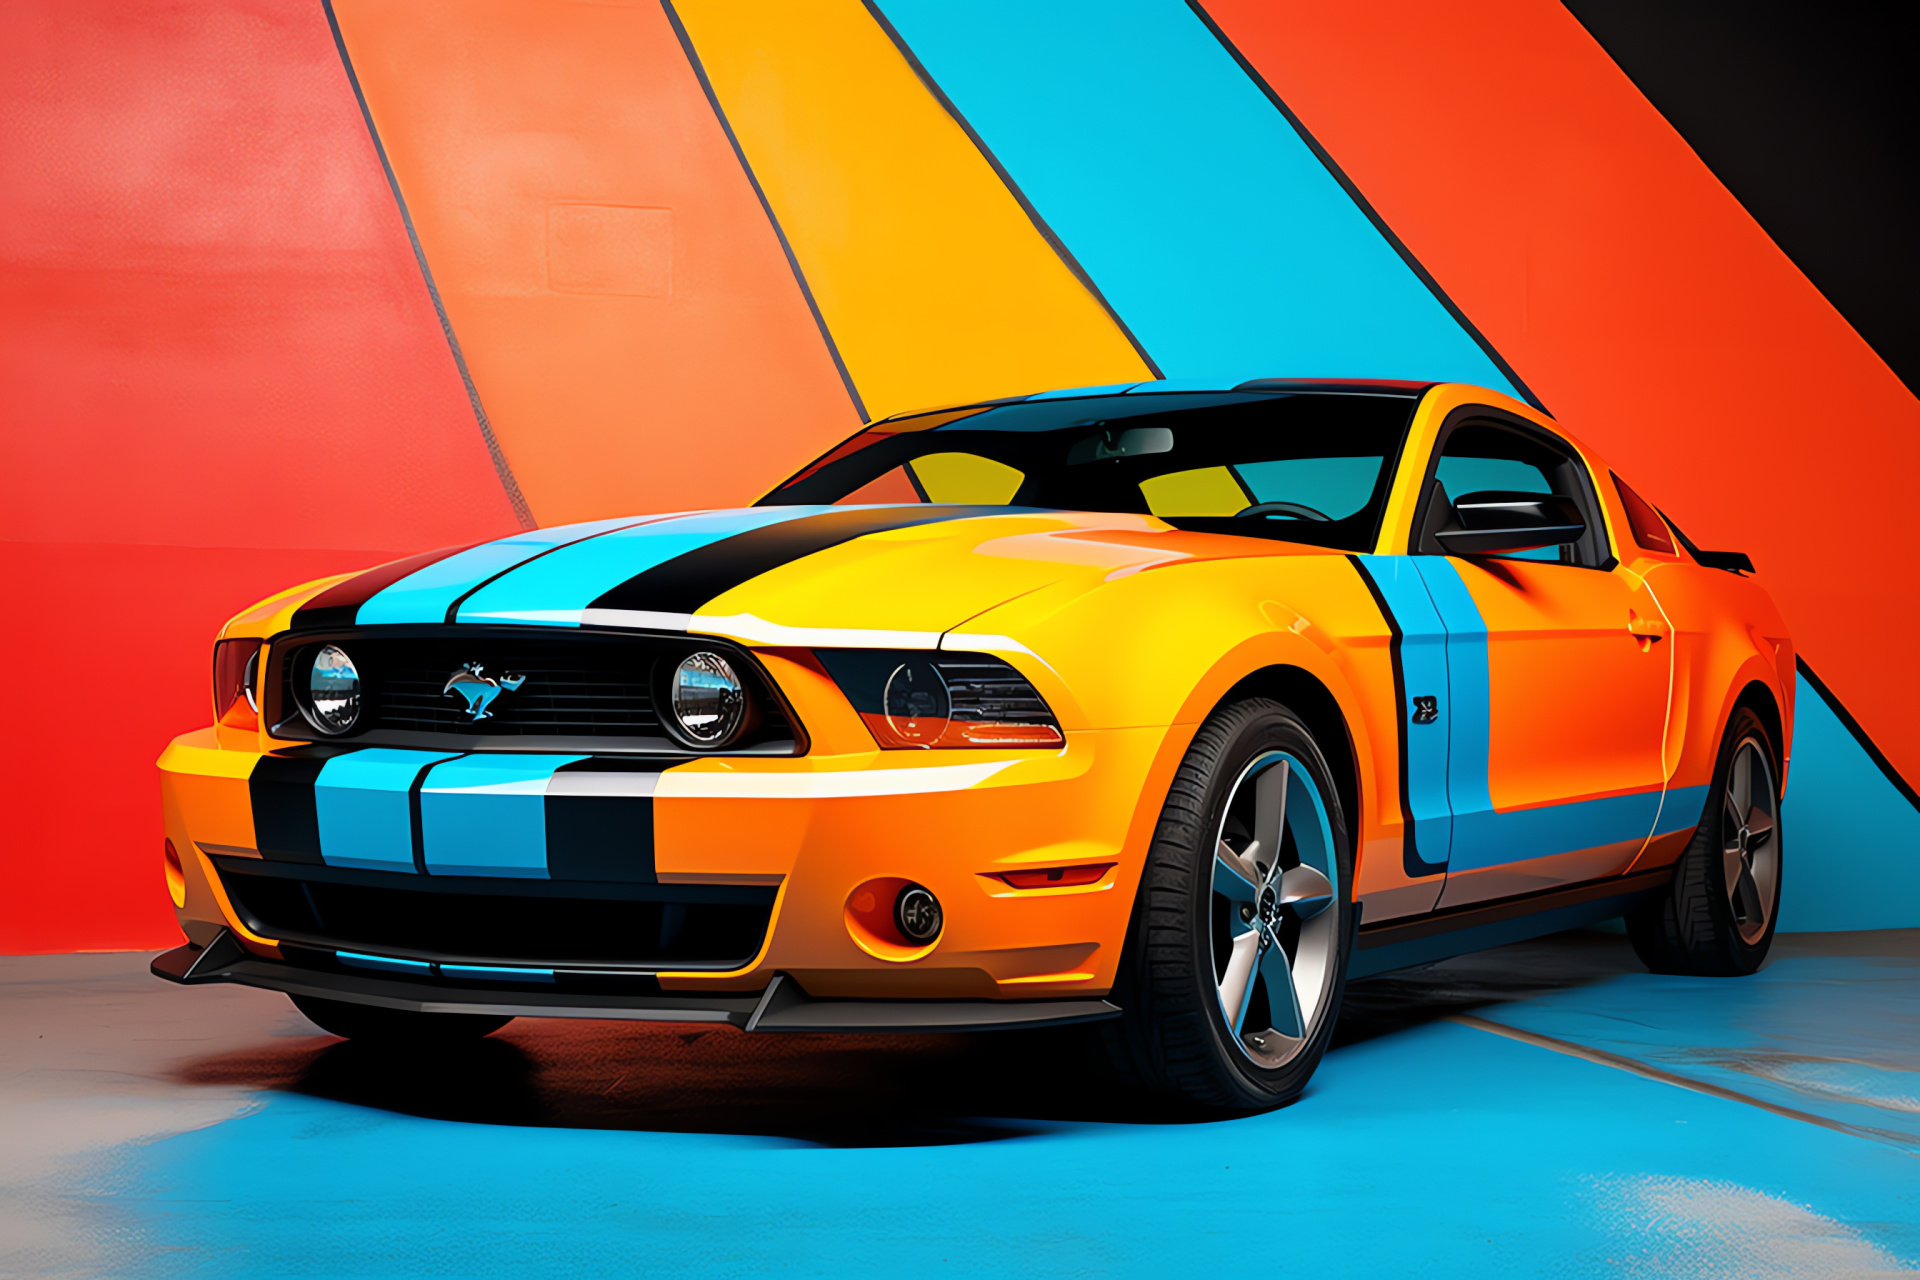 Mustang scenic background, Wide angle framing, Dynamic vehicle traits, Auto design flair, HD Desktop Image